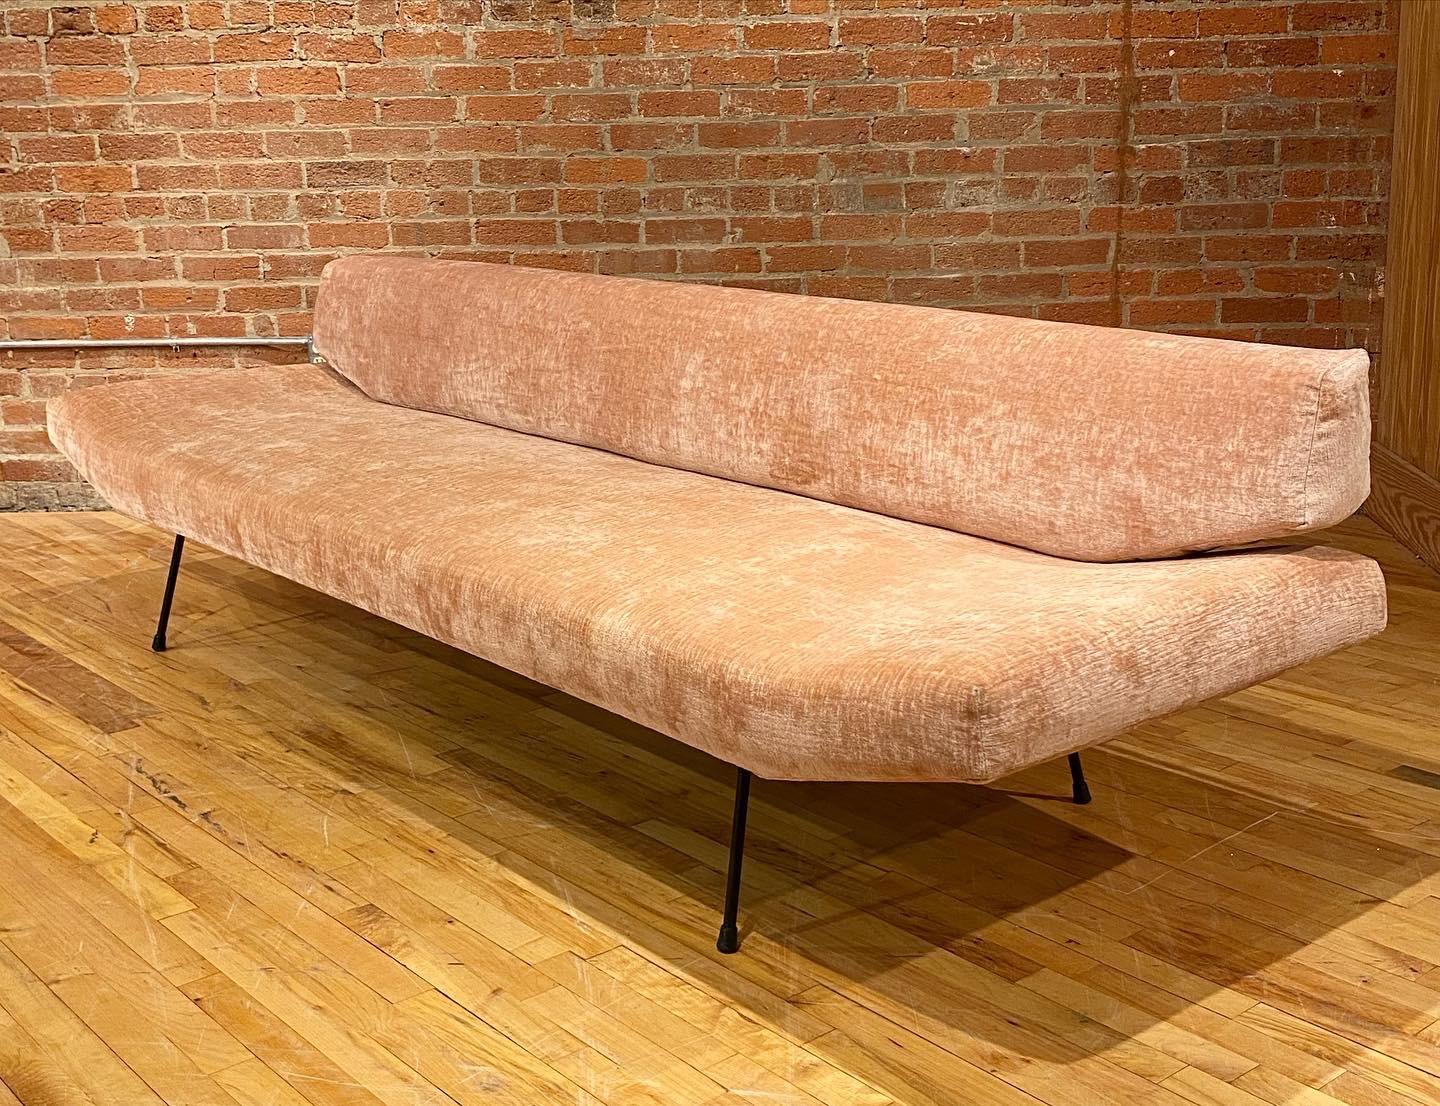 Beautiful, long, and low sofa by Adrian Pearsall. Simple and pretty restored with new foam and cut velvet upholstery.